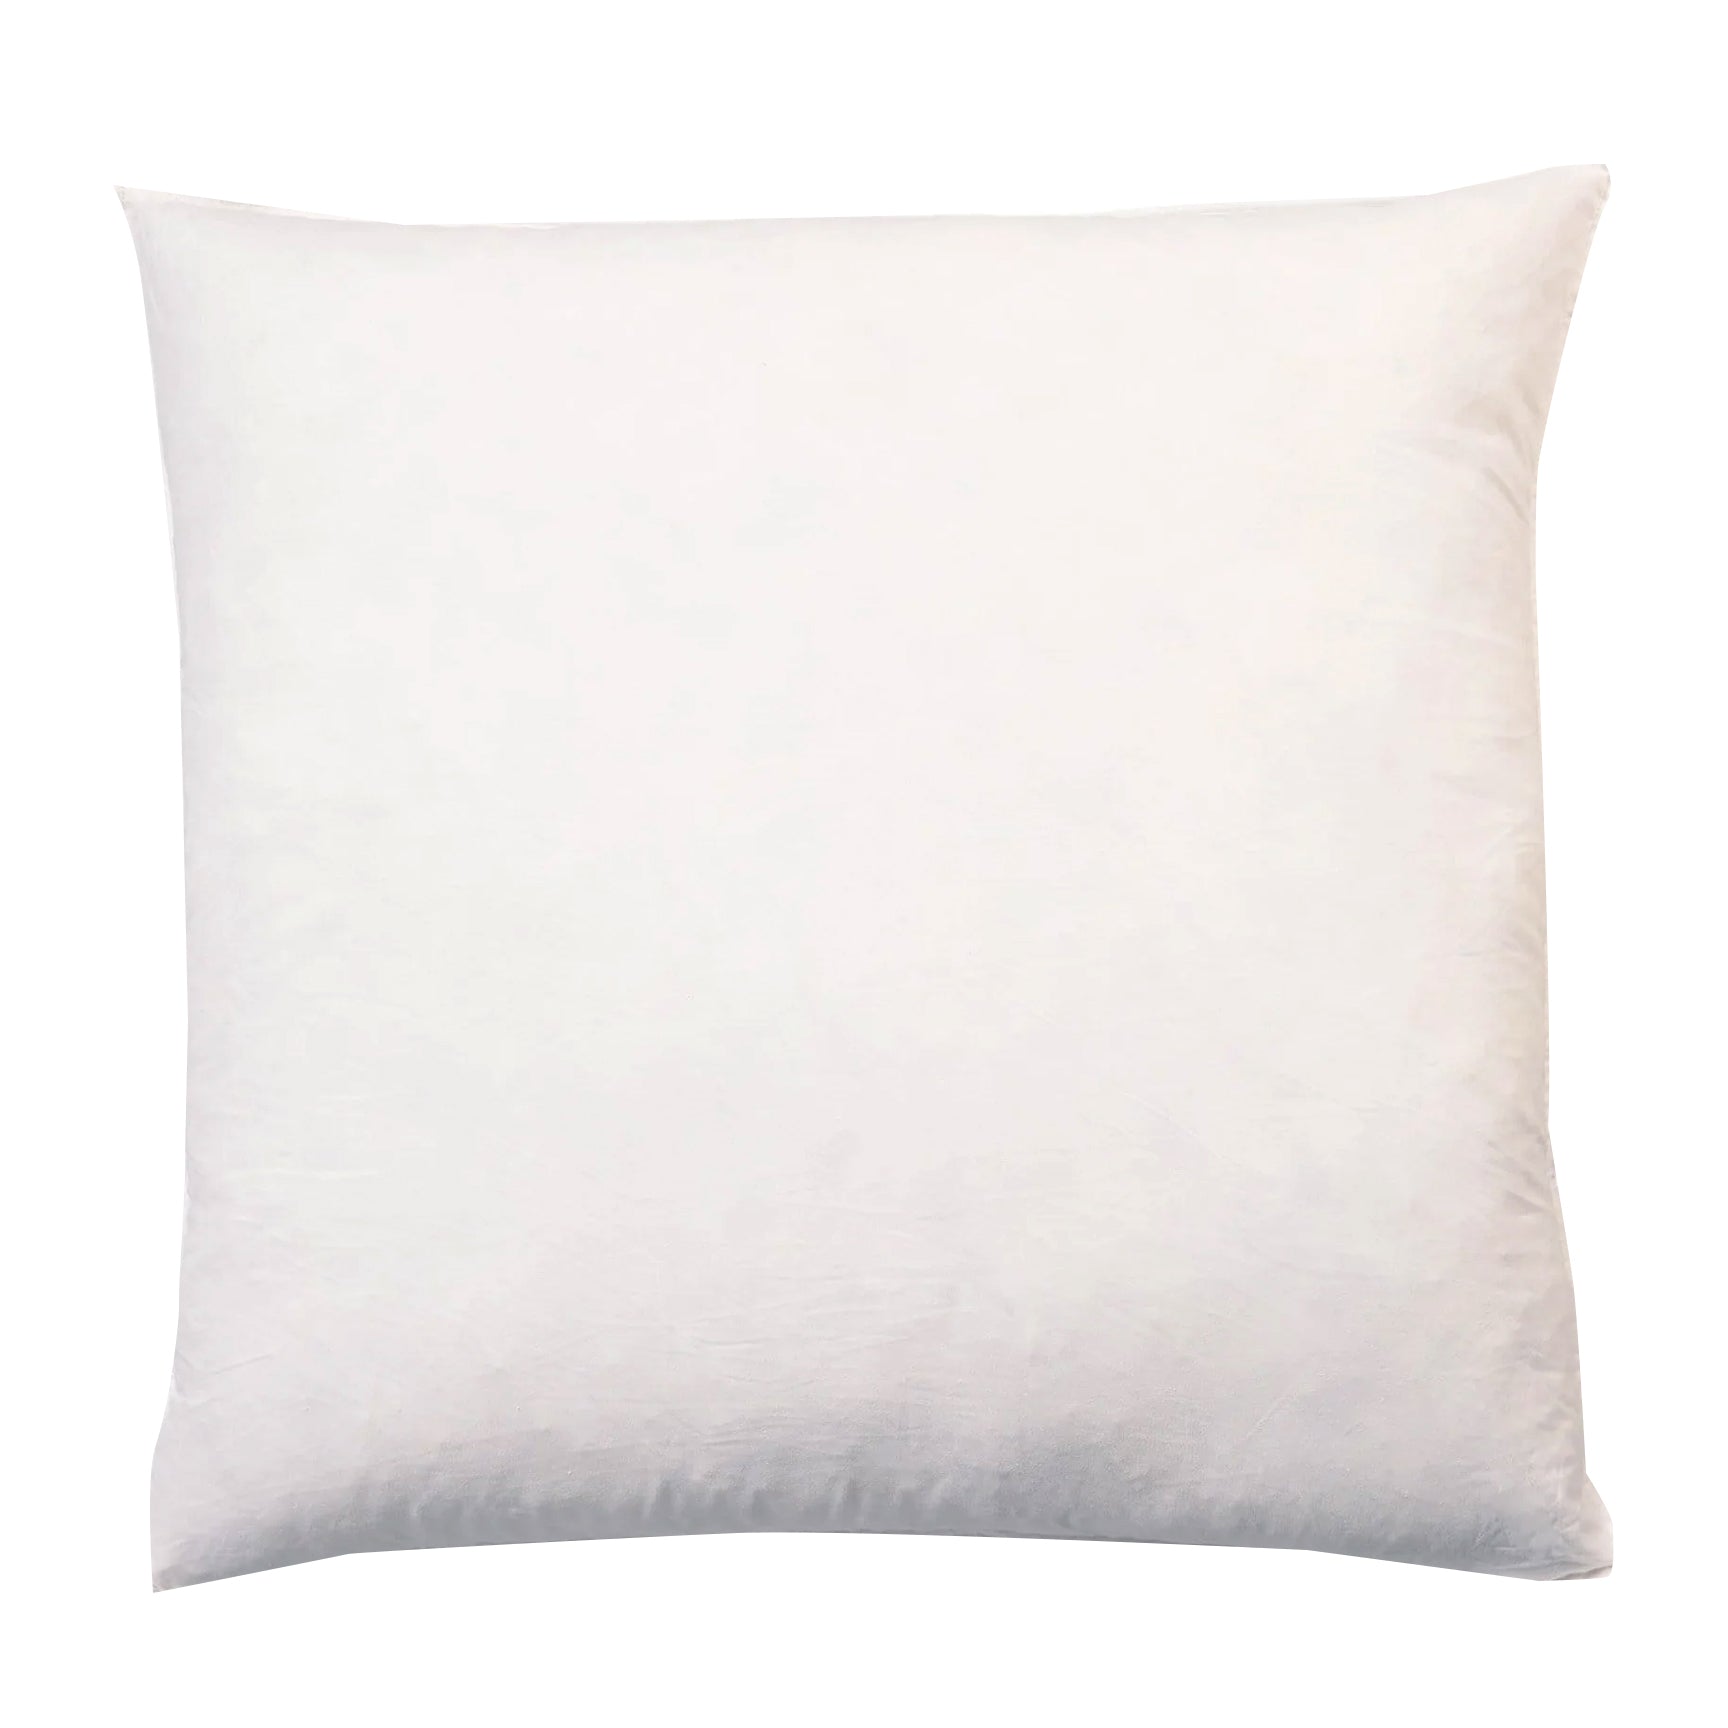 Cushion Fillers  Feather Cushions Fillers - Buy online at Baigali